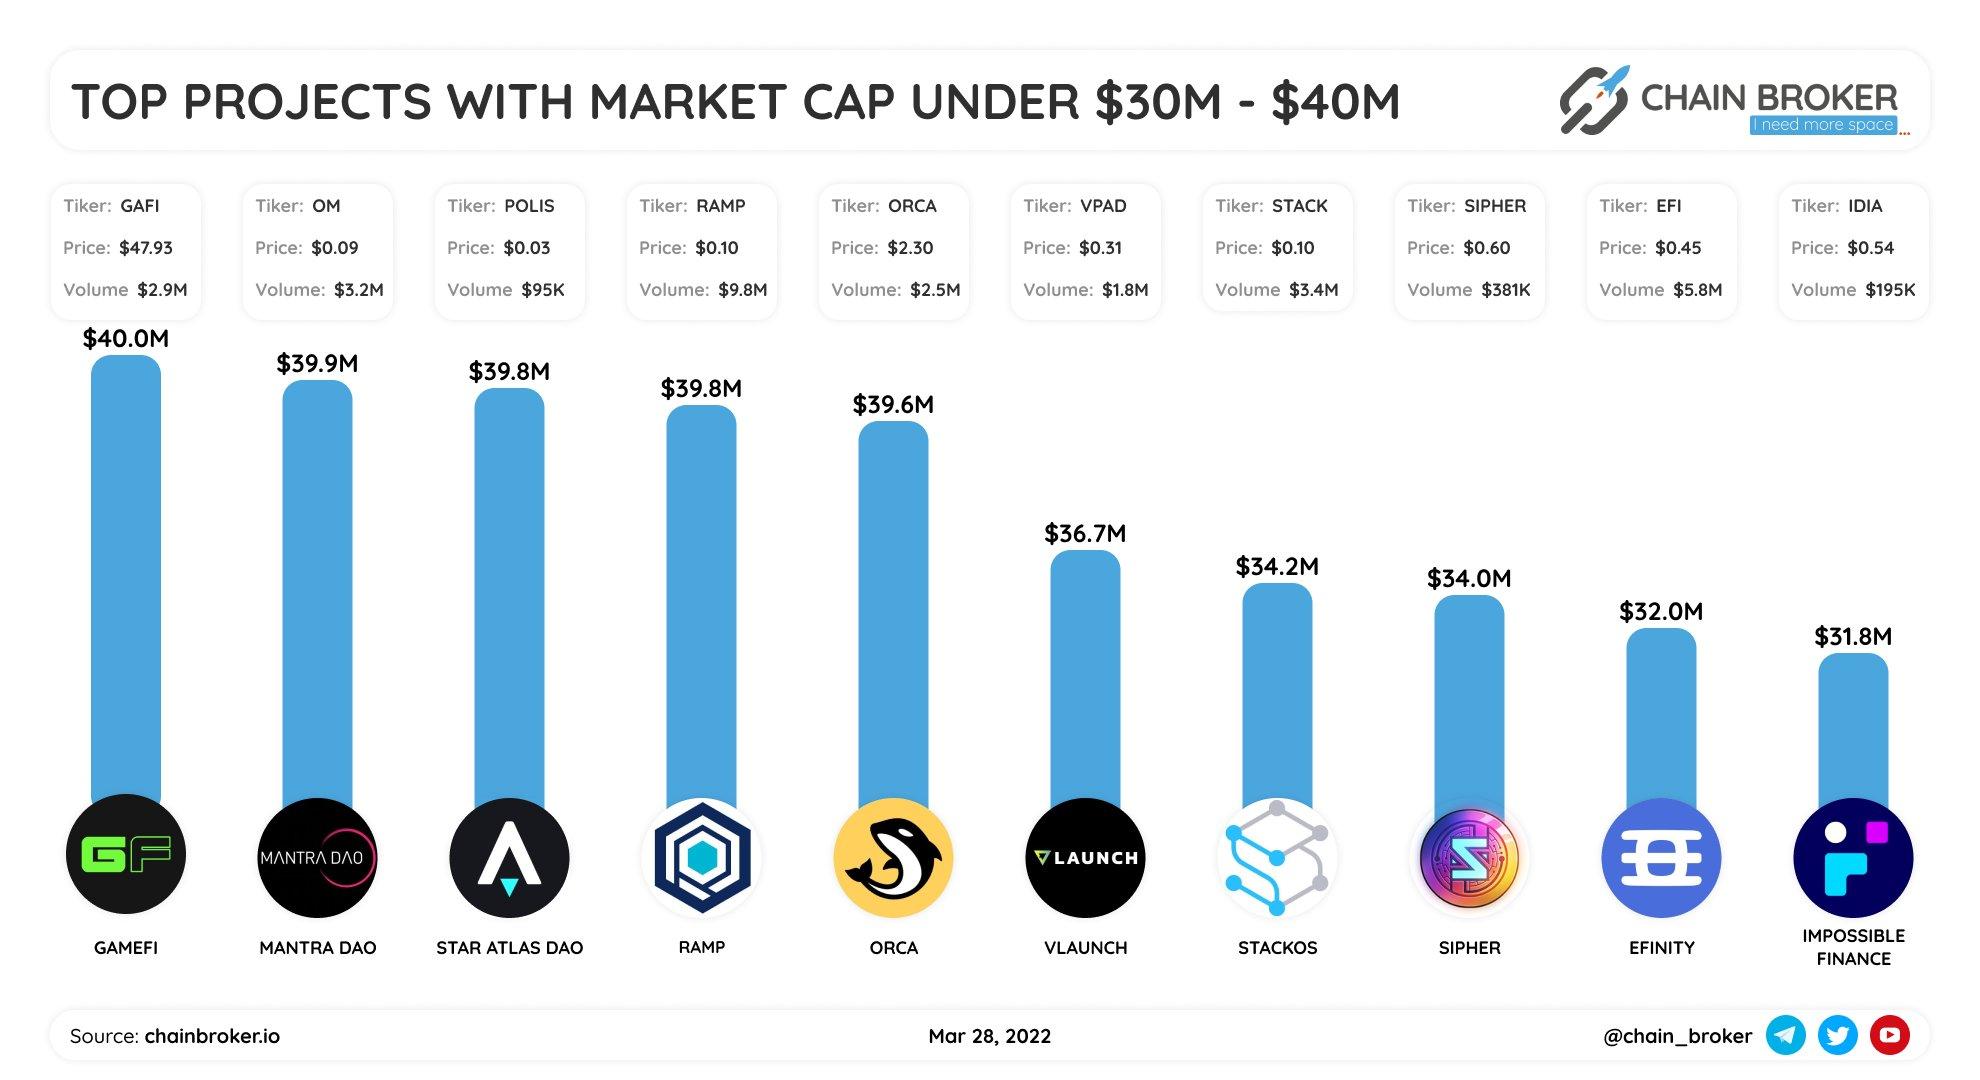 Top projects with market cap $30M - $40M